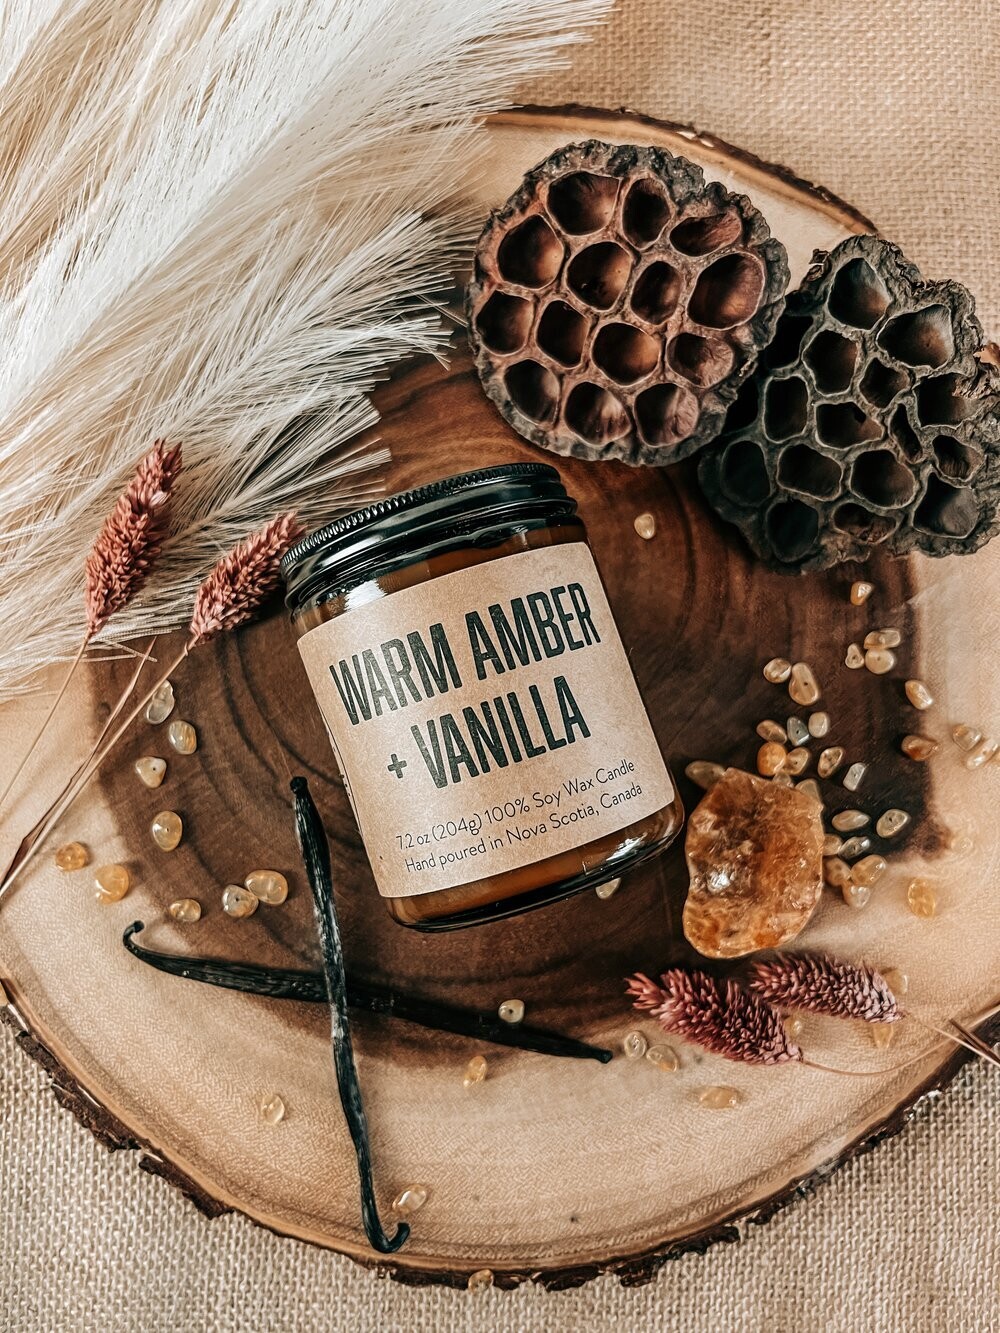 Warm Amber Vanilla - Lawrencetown Candle Co